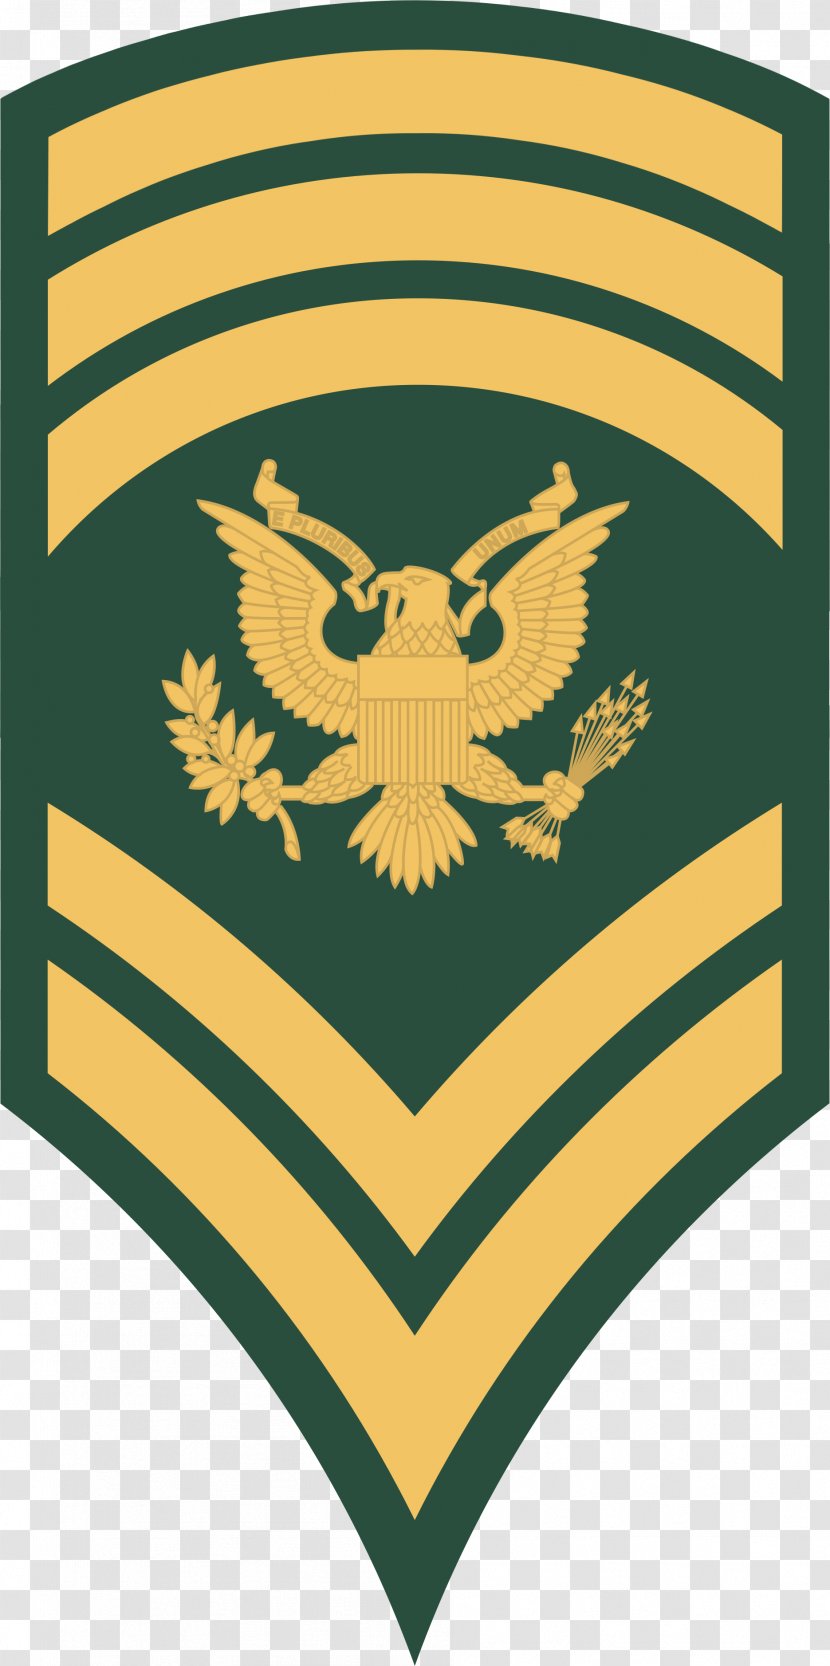 Specialist United States Army Military Rank Non-commissioned Officer Transparent PNG